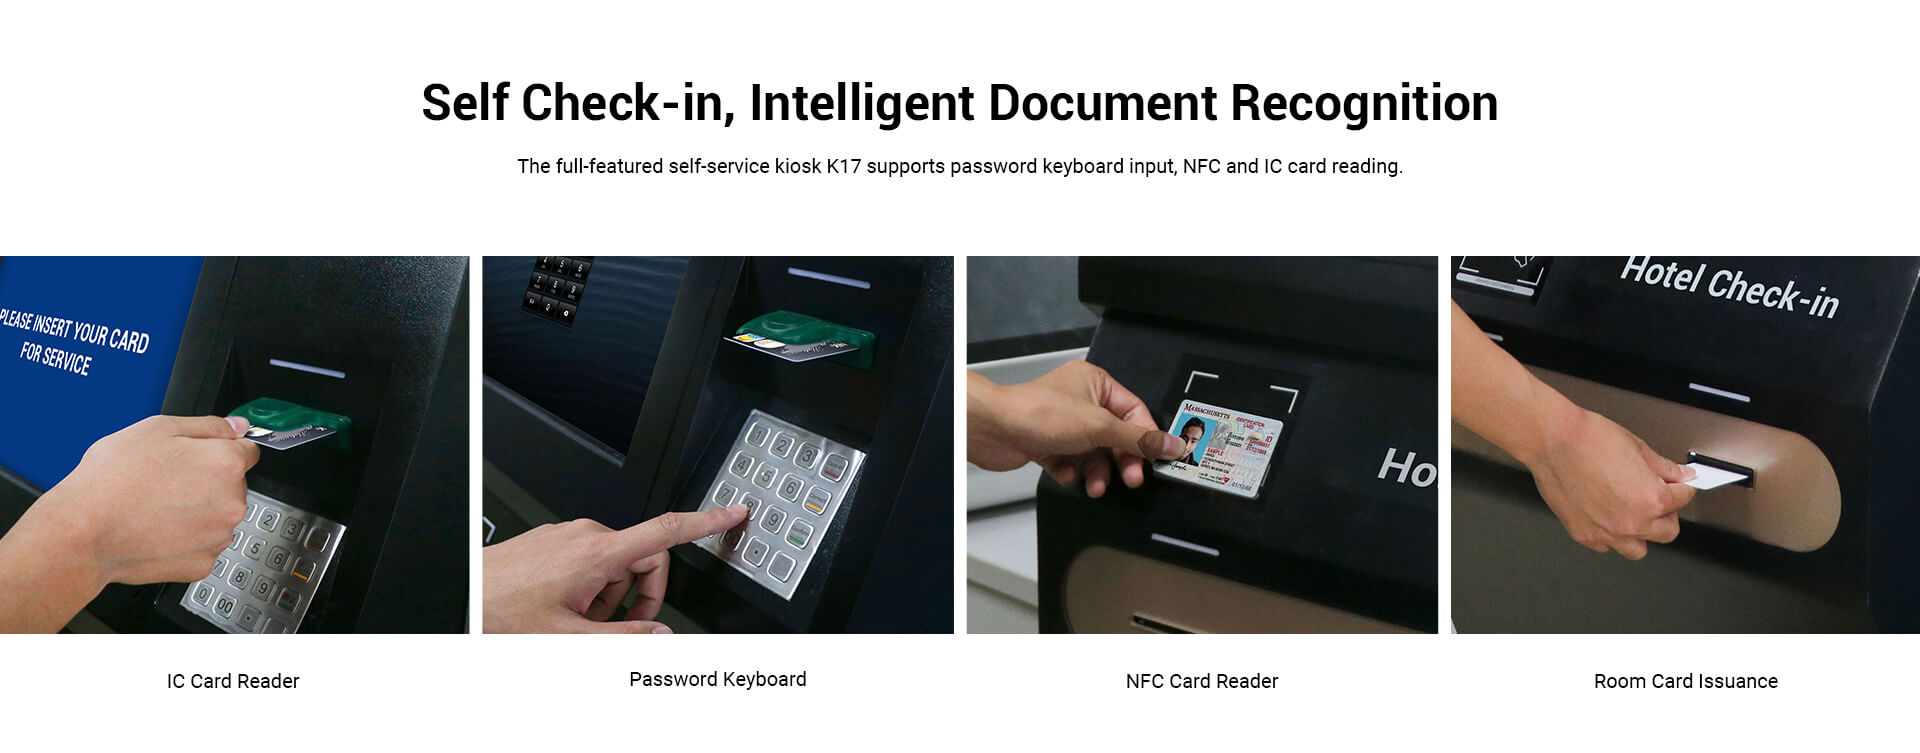 Self Check-in Kiosk Intelligent Document Recognition